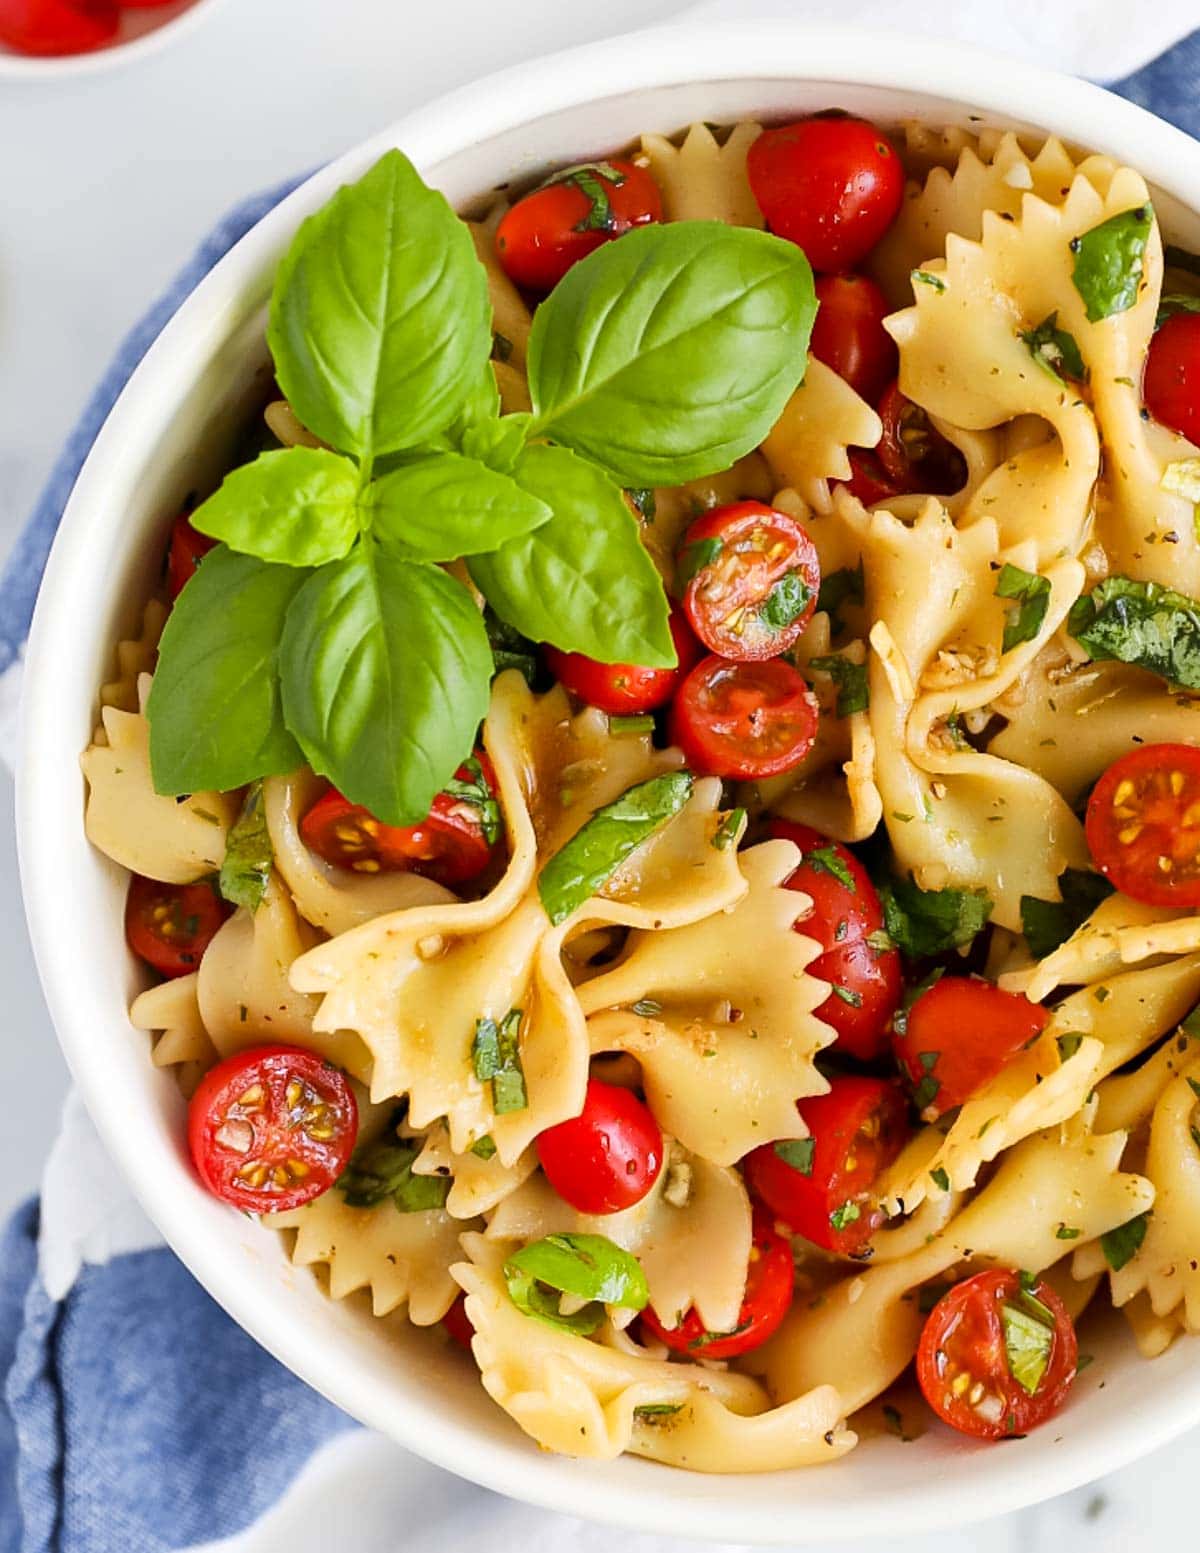 A close-up picture of a white bowl filled with pasta, tomatoes, and fresh green basil